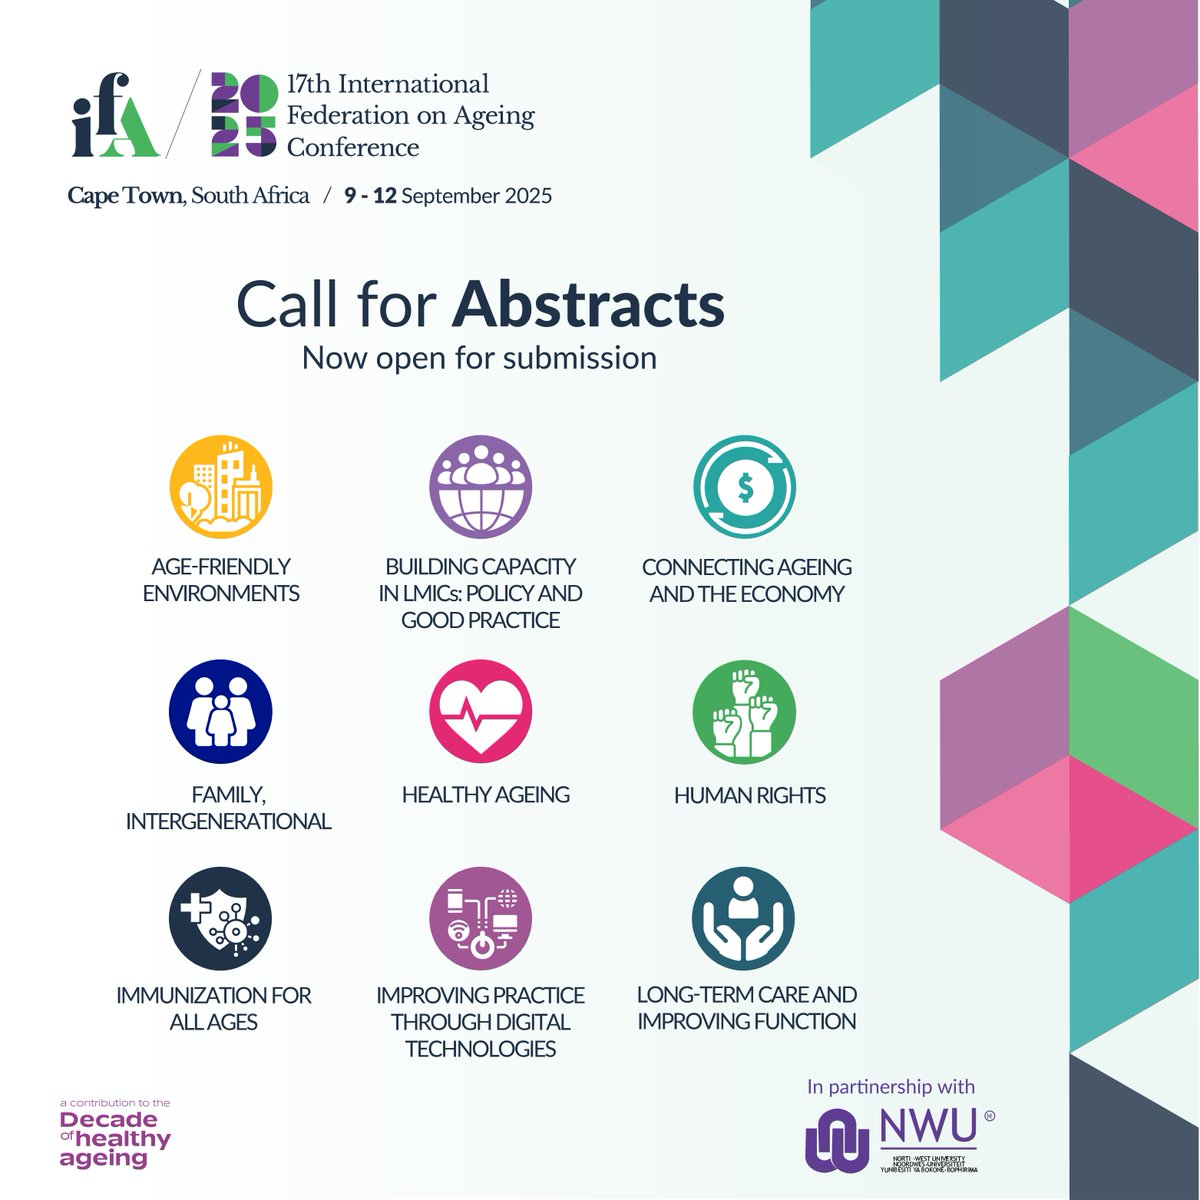 Abstract submissions now open for the #IFACONF2025! Share your insights, research, and ideas. Make a meaningful contribution to the global conversation on ageing – submit your abstract today! Visit ifaconf.ngo for details. #AgeingConference #CallForAbstracts